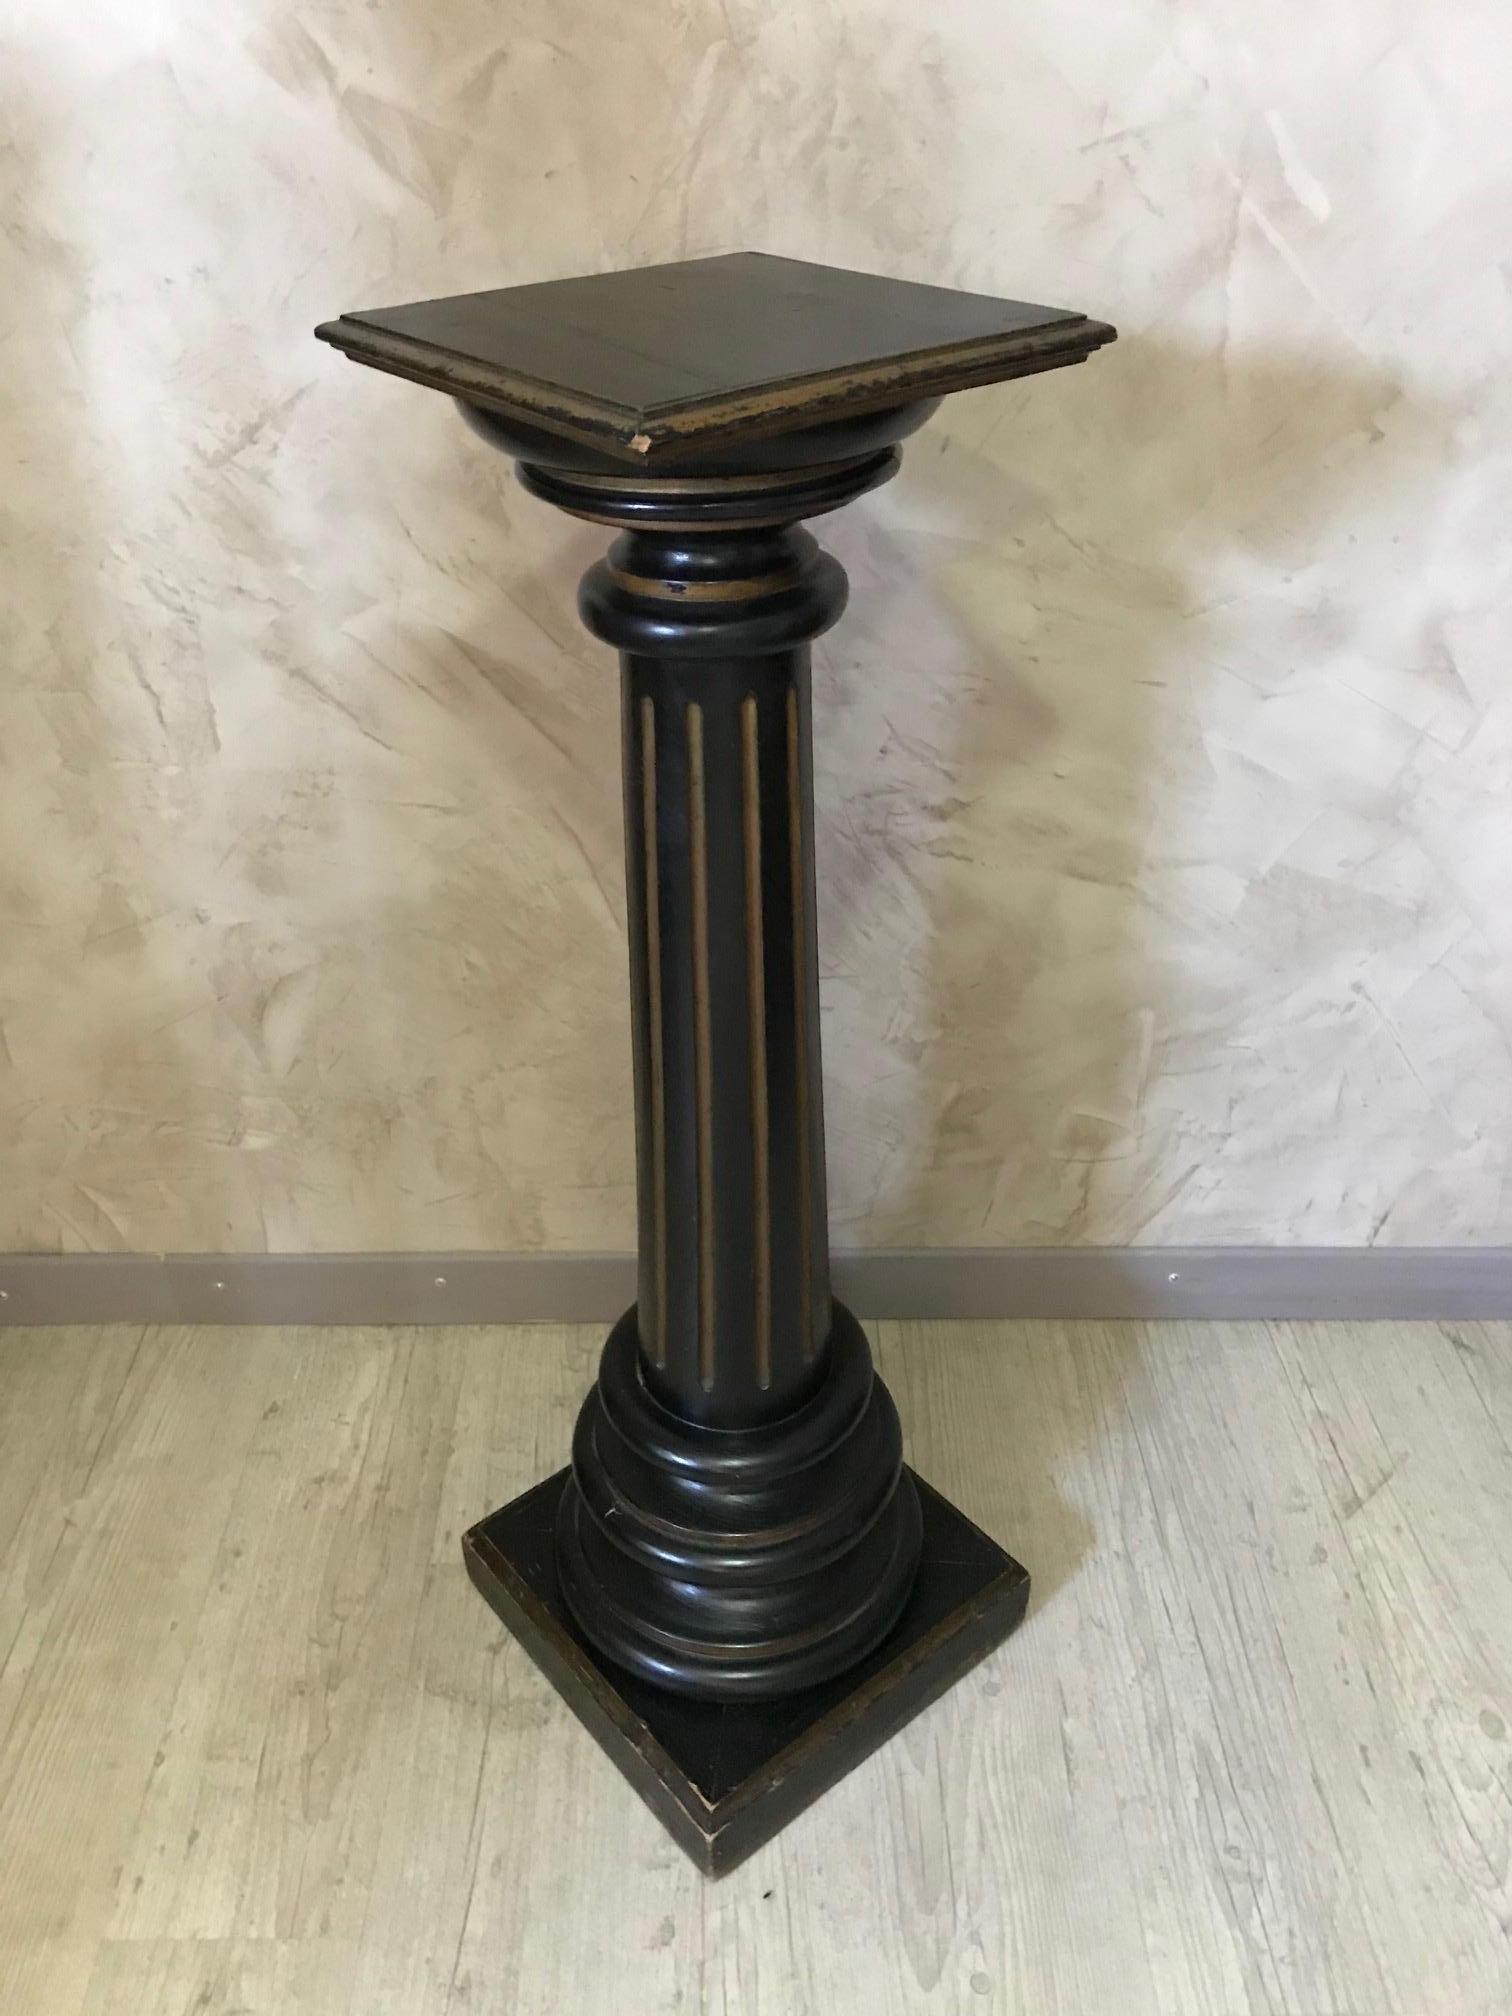 Beautiful French Napoleon III black painted wooden column.
Ideal to show a sculpture.
Good condition and quality.